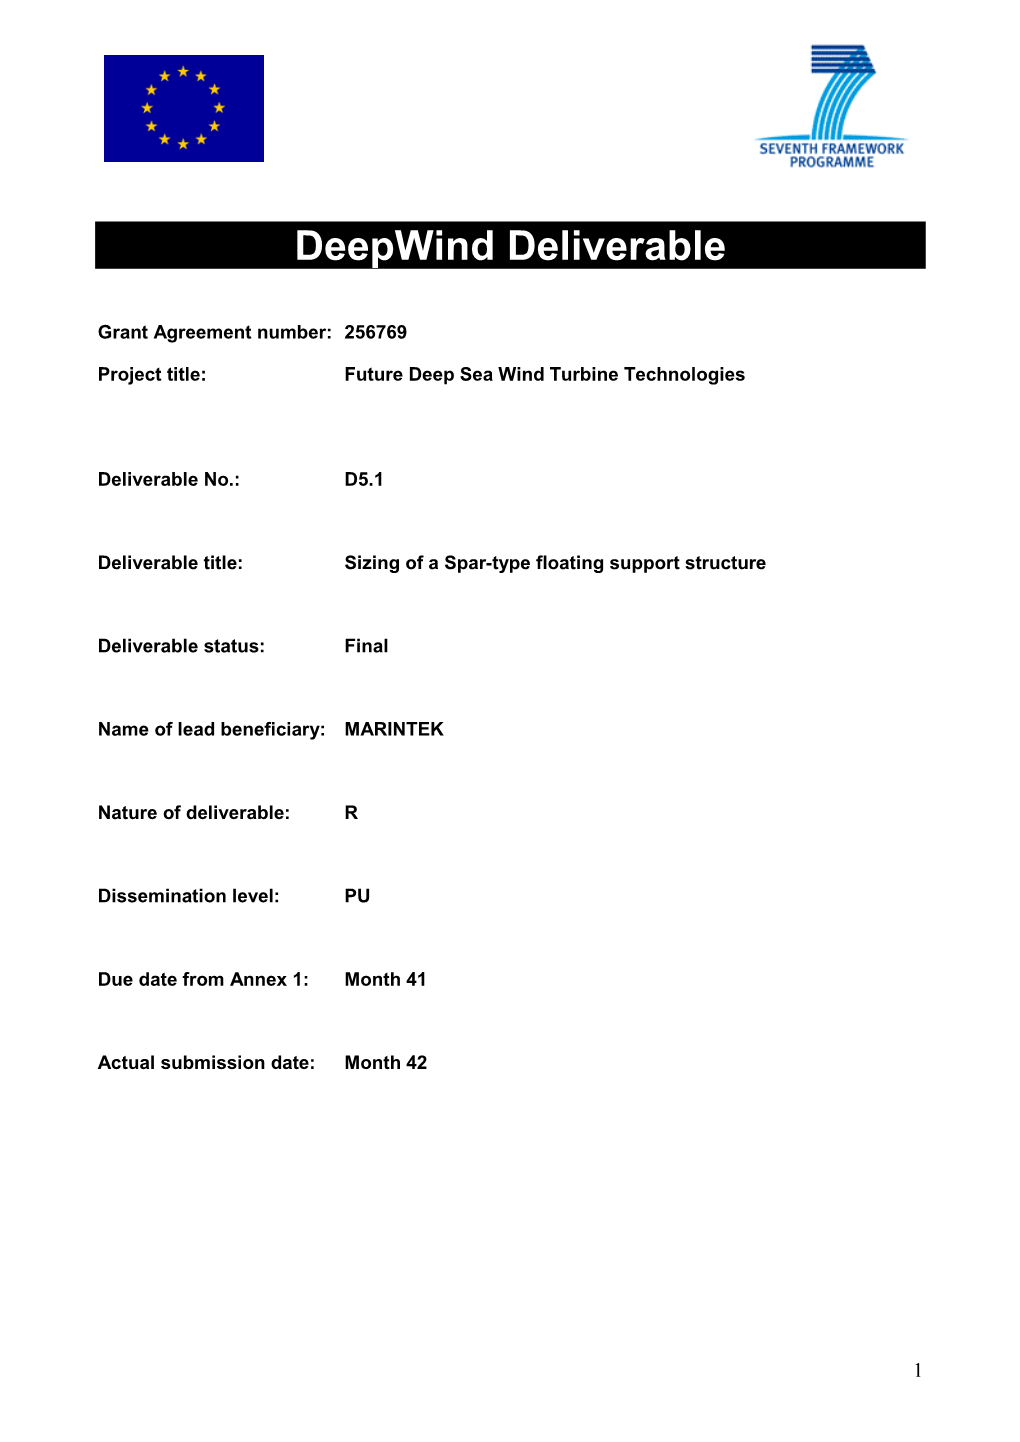 Front Page: DTU WE and Deepwind ©